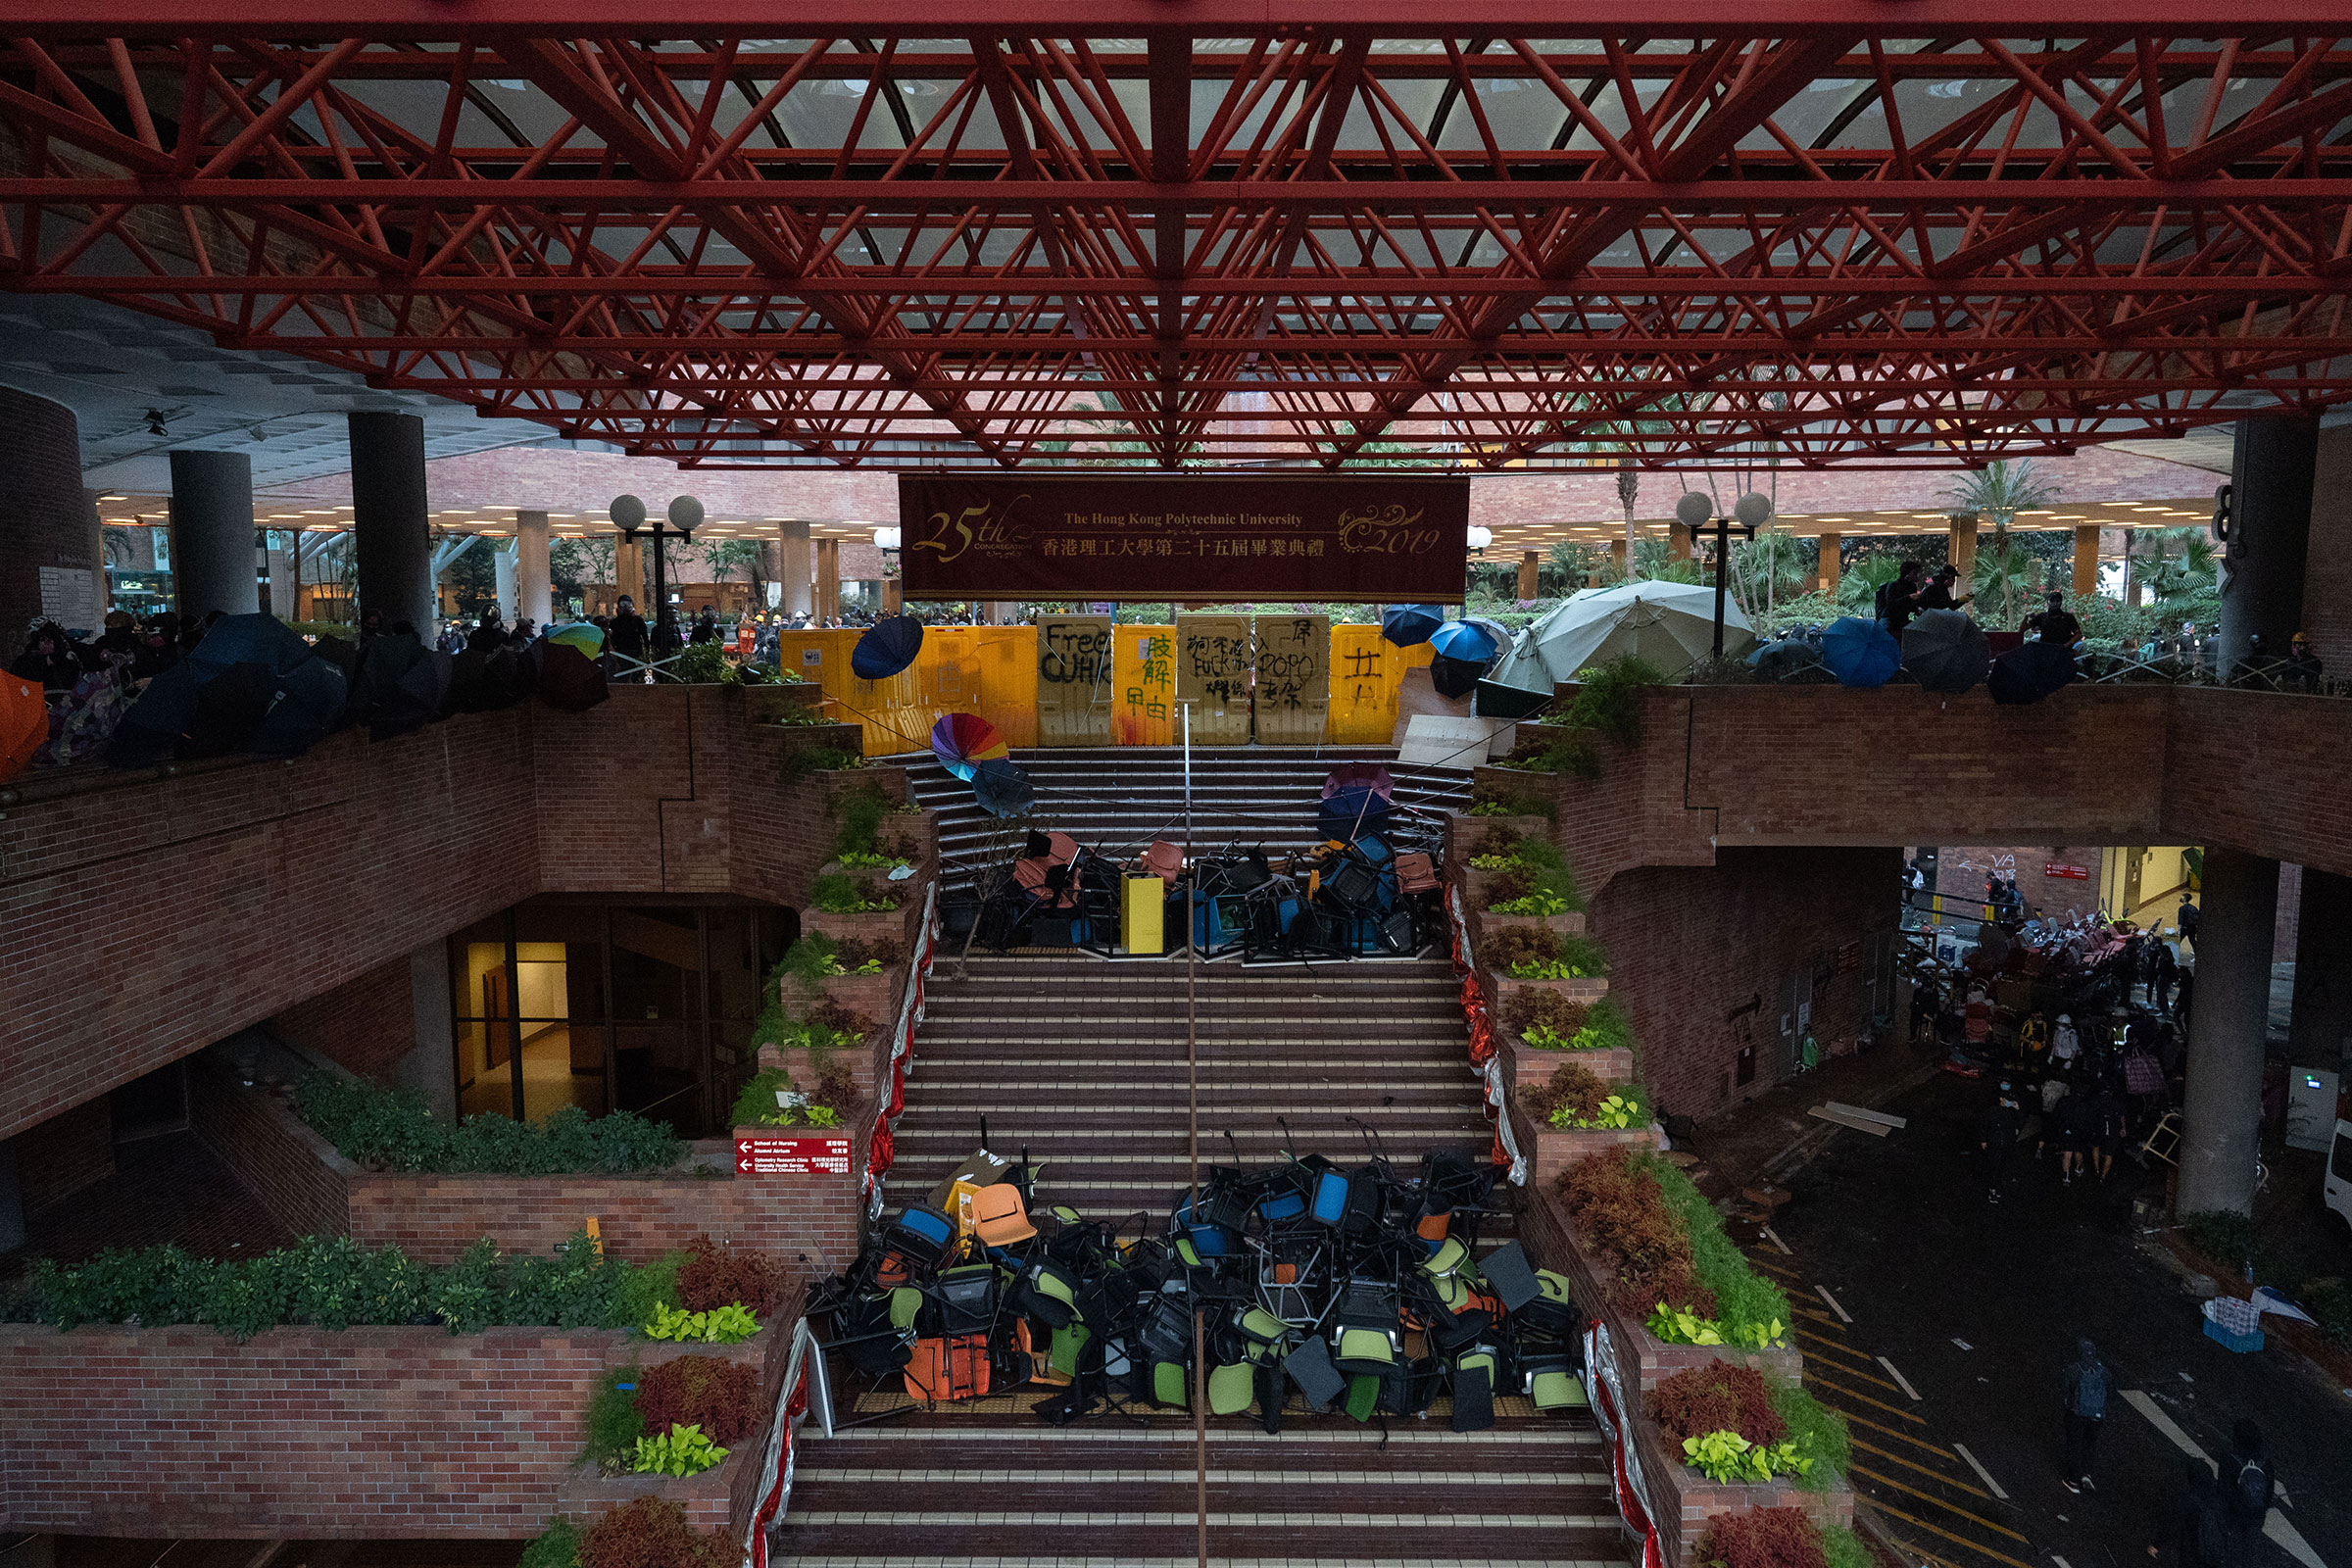 Polytechnic University's main atrium, fortified with umbrellas and barricades, Nov. 14. (Bing Guan)